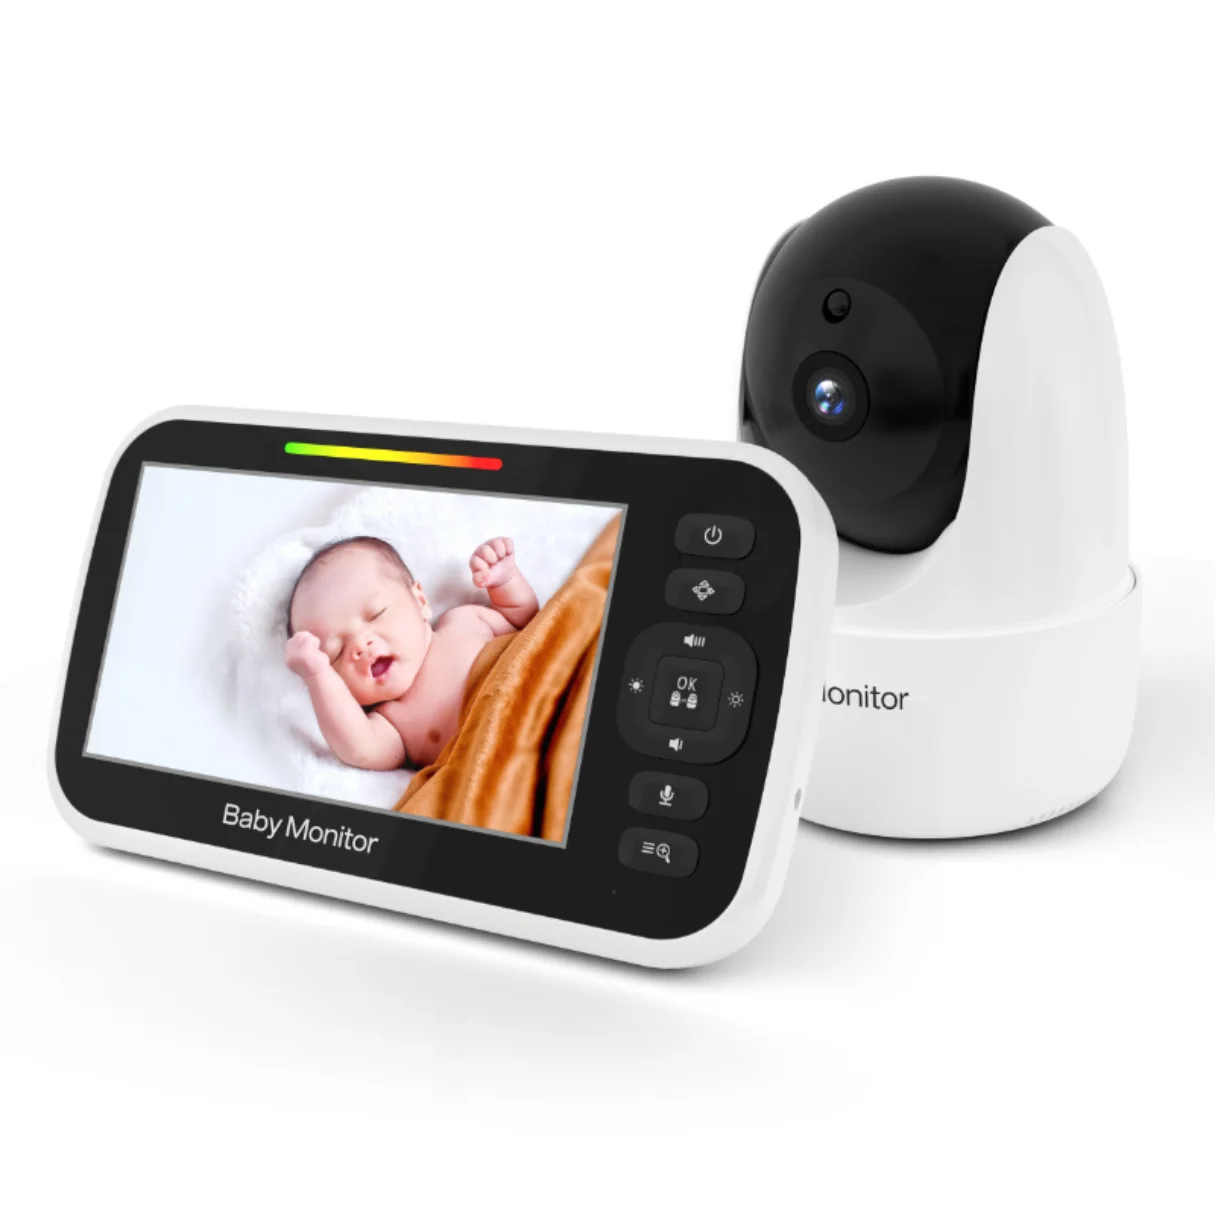 Stalwart p2 Video baby monitor camera best 5 inch screen and camera